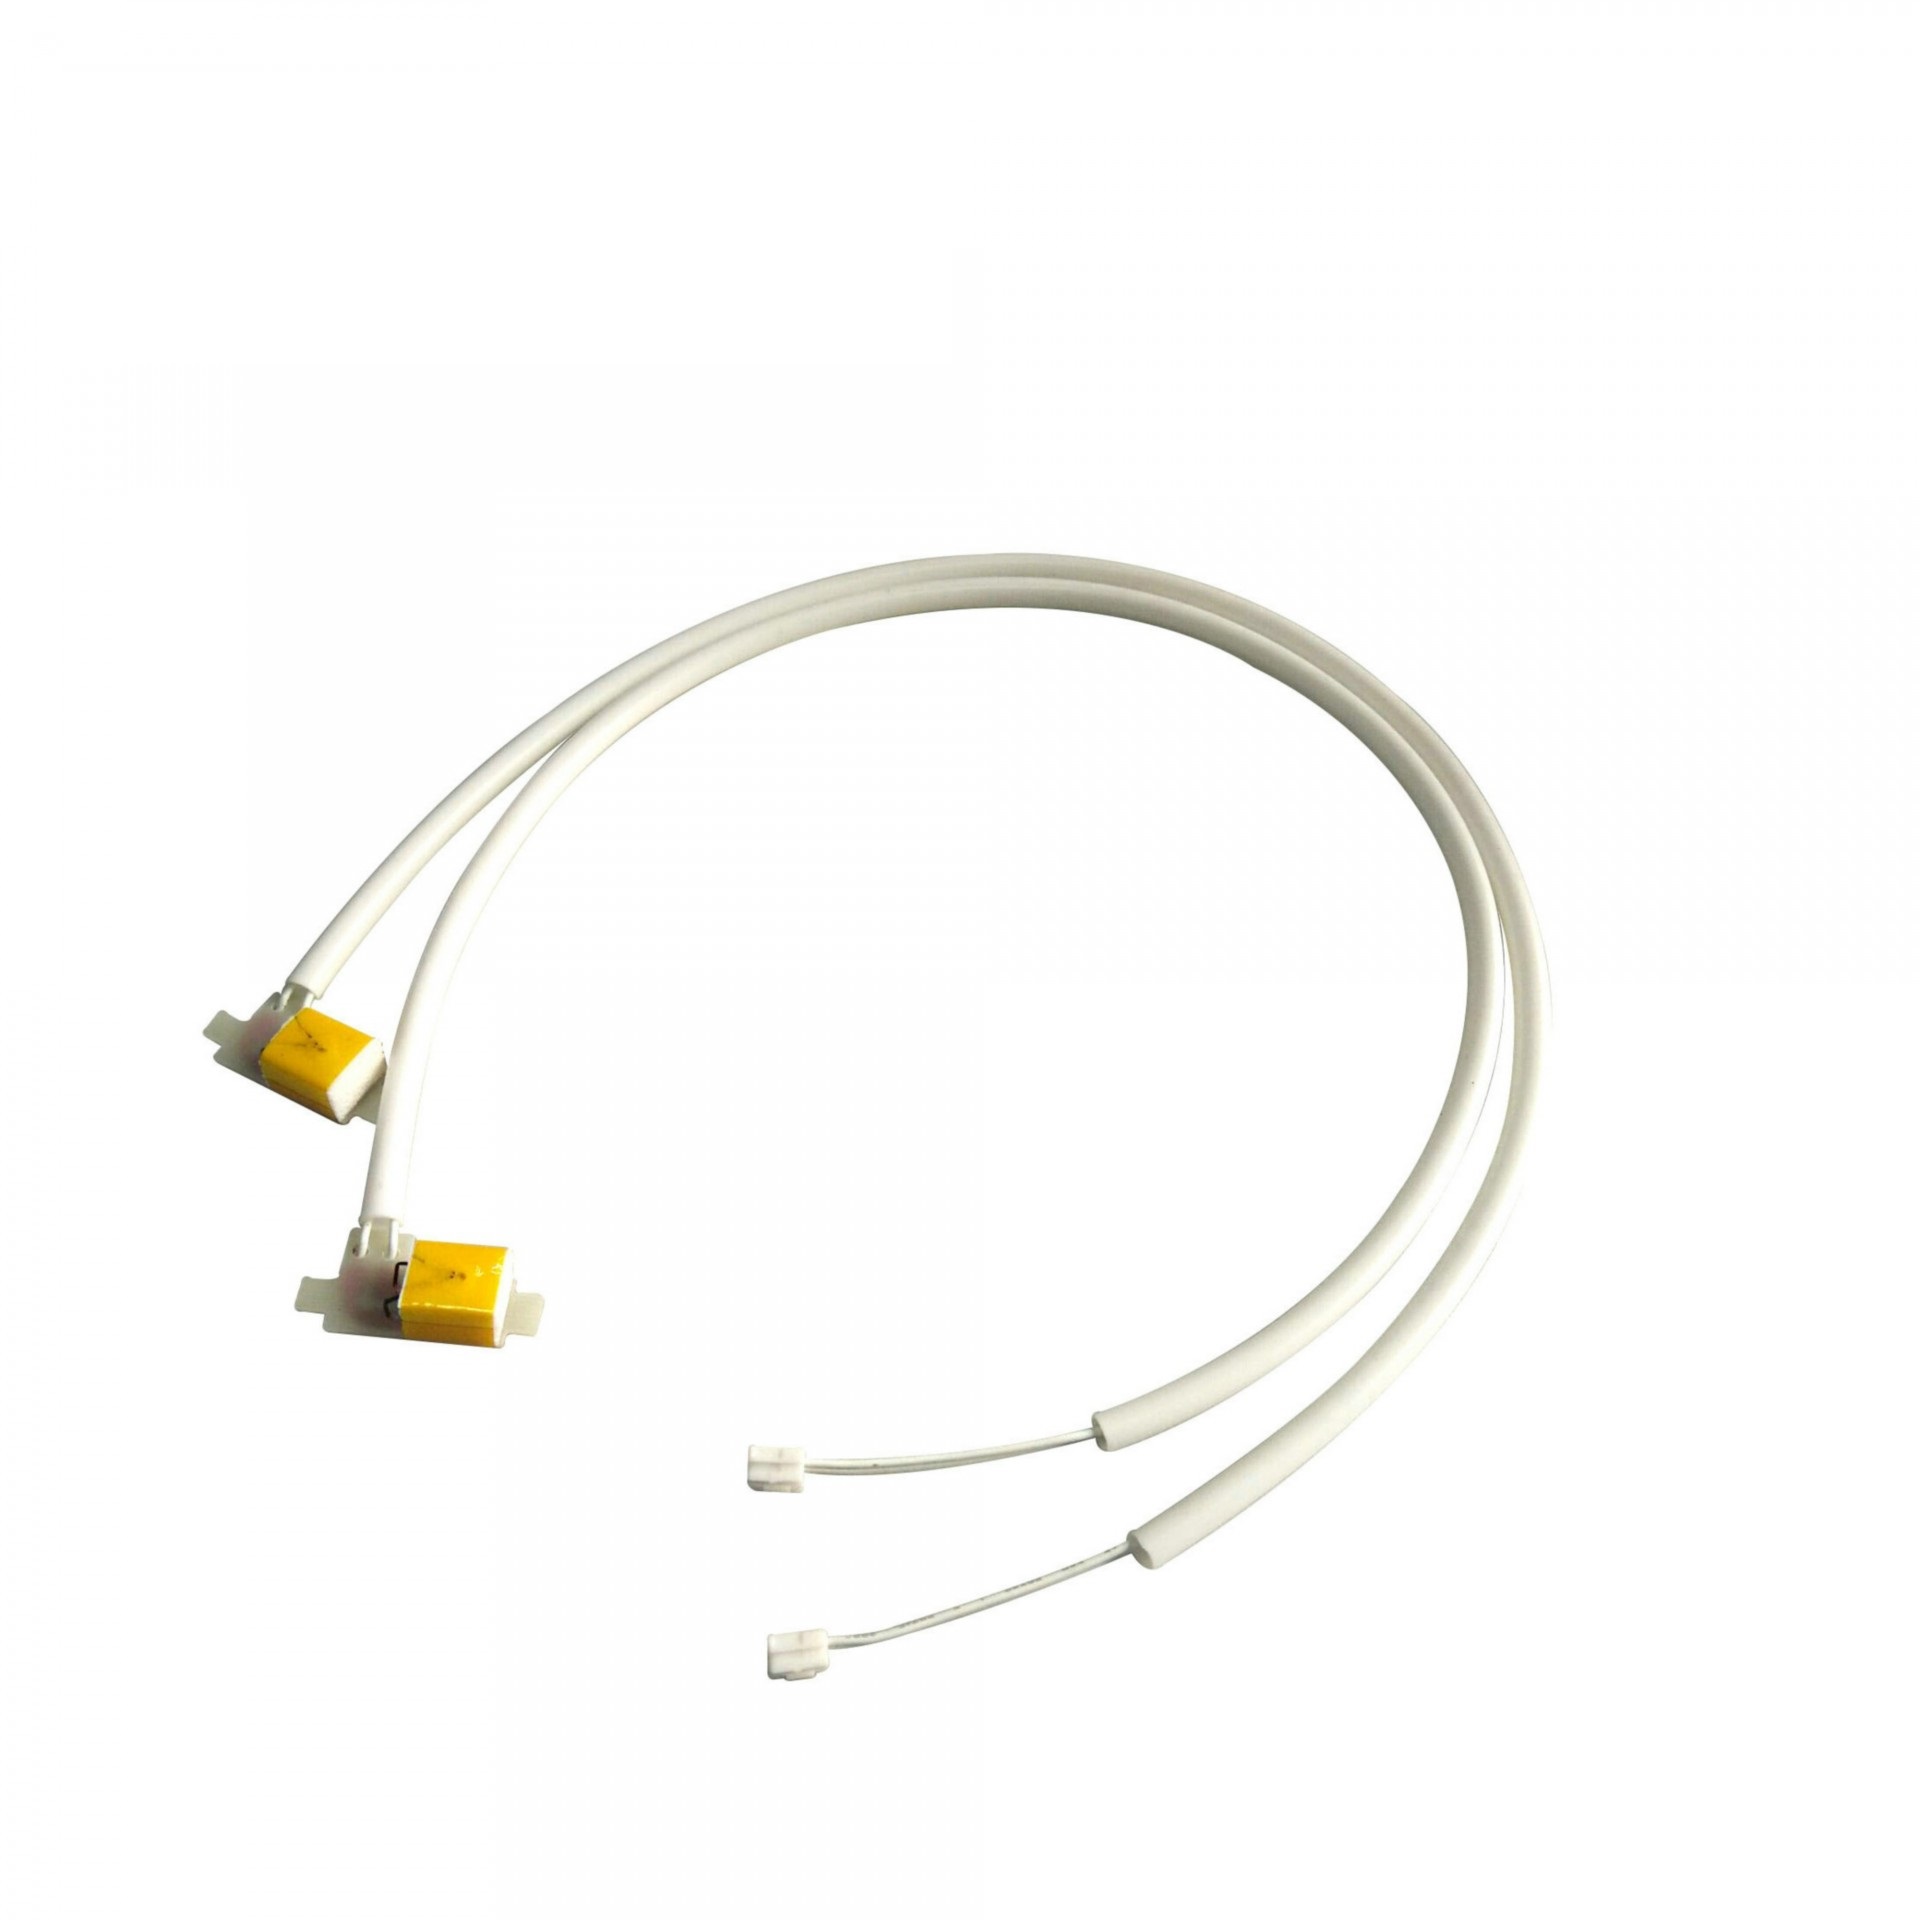 Fast reaction temperature sensor of office automation equipment